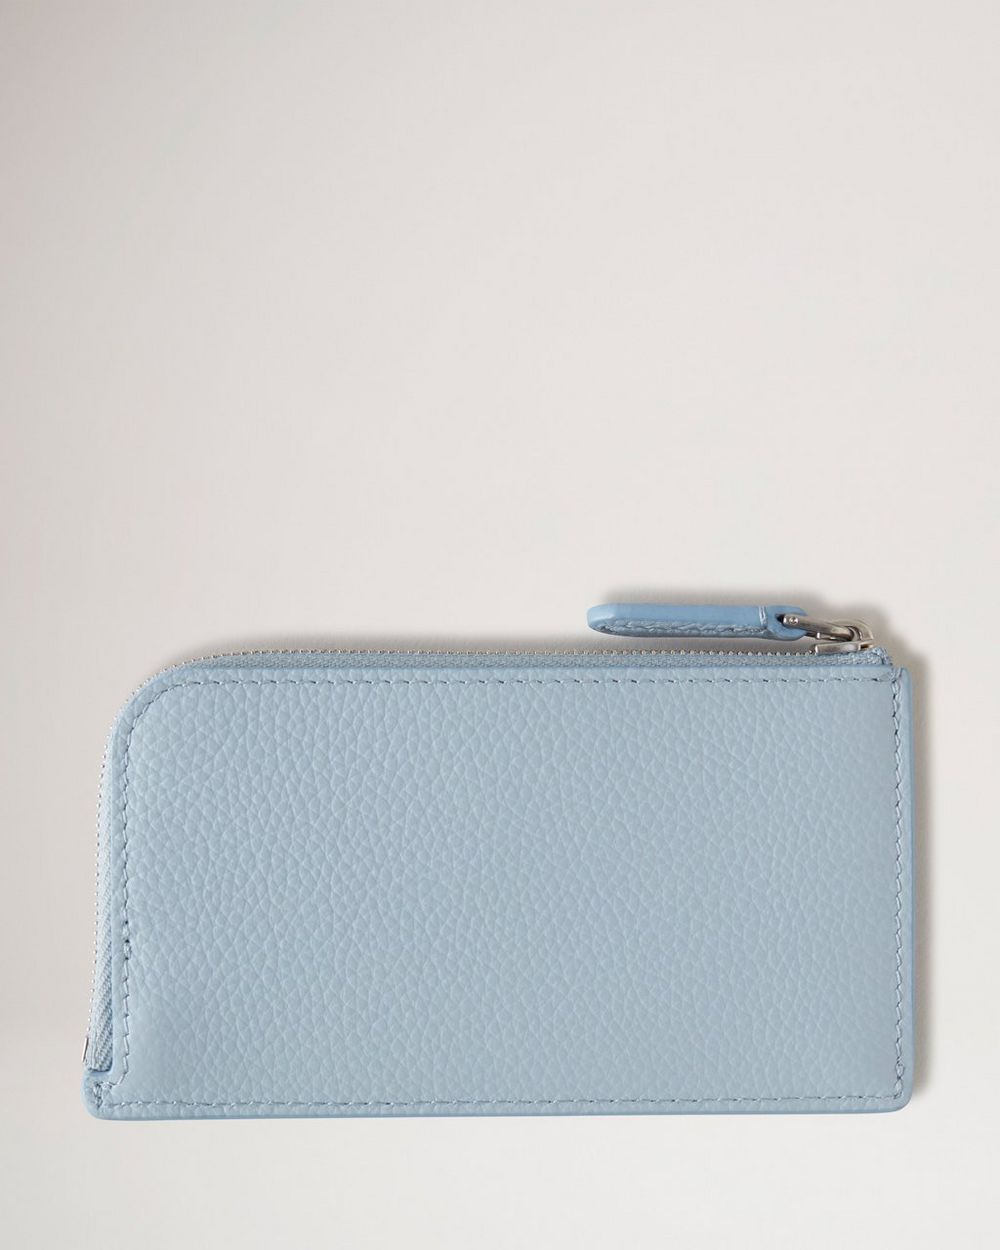 Mulberry Continental Key Pouch